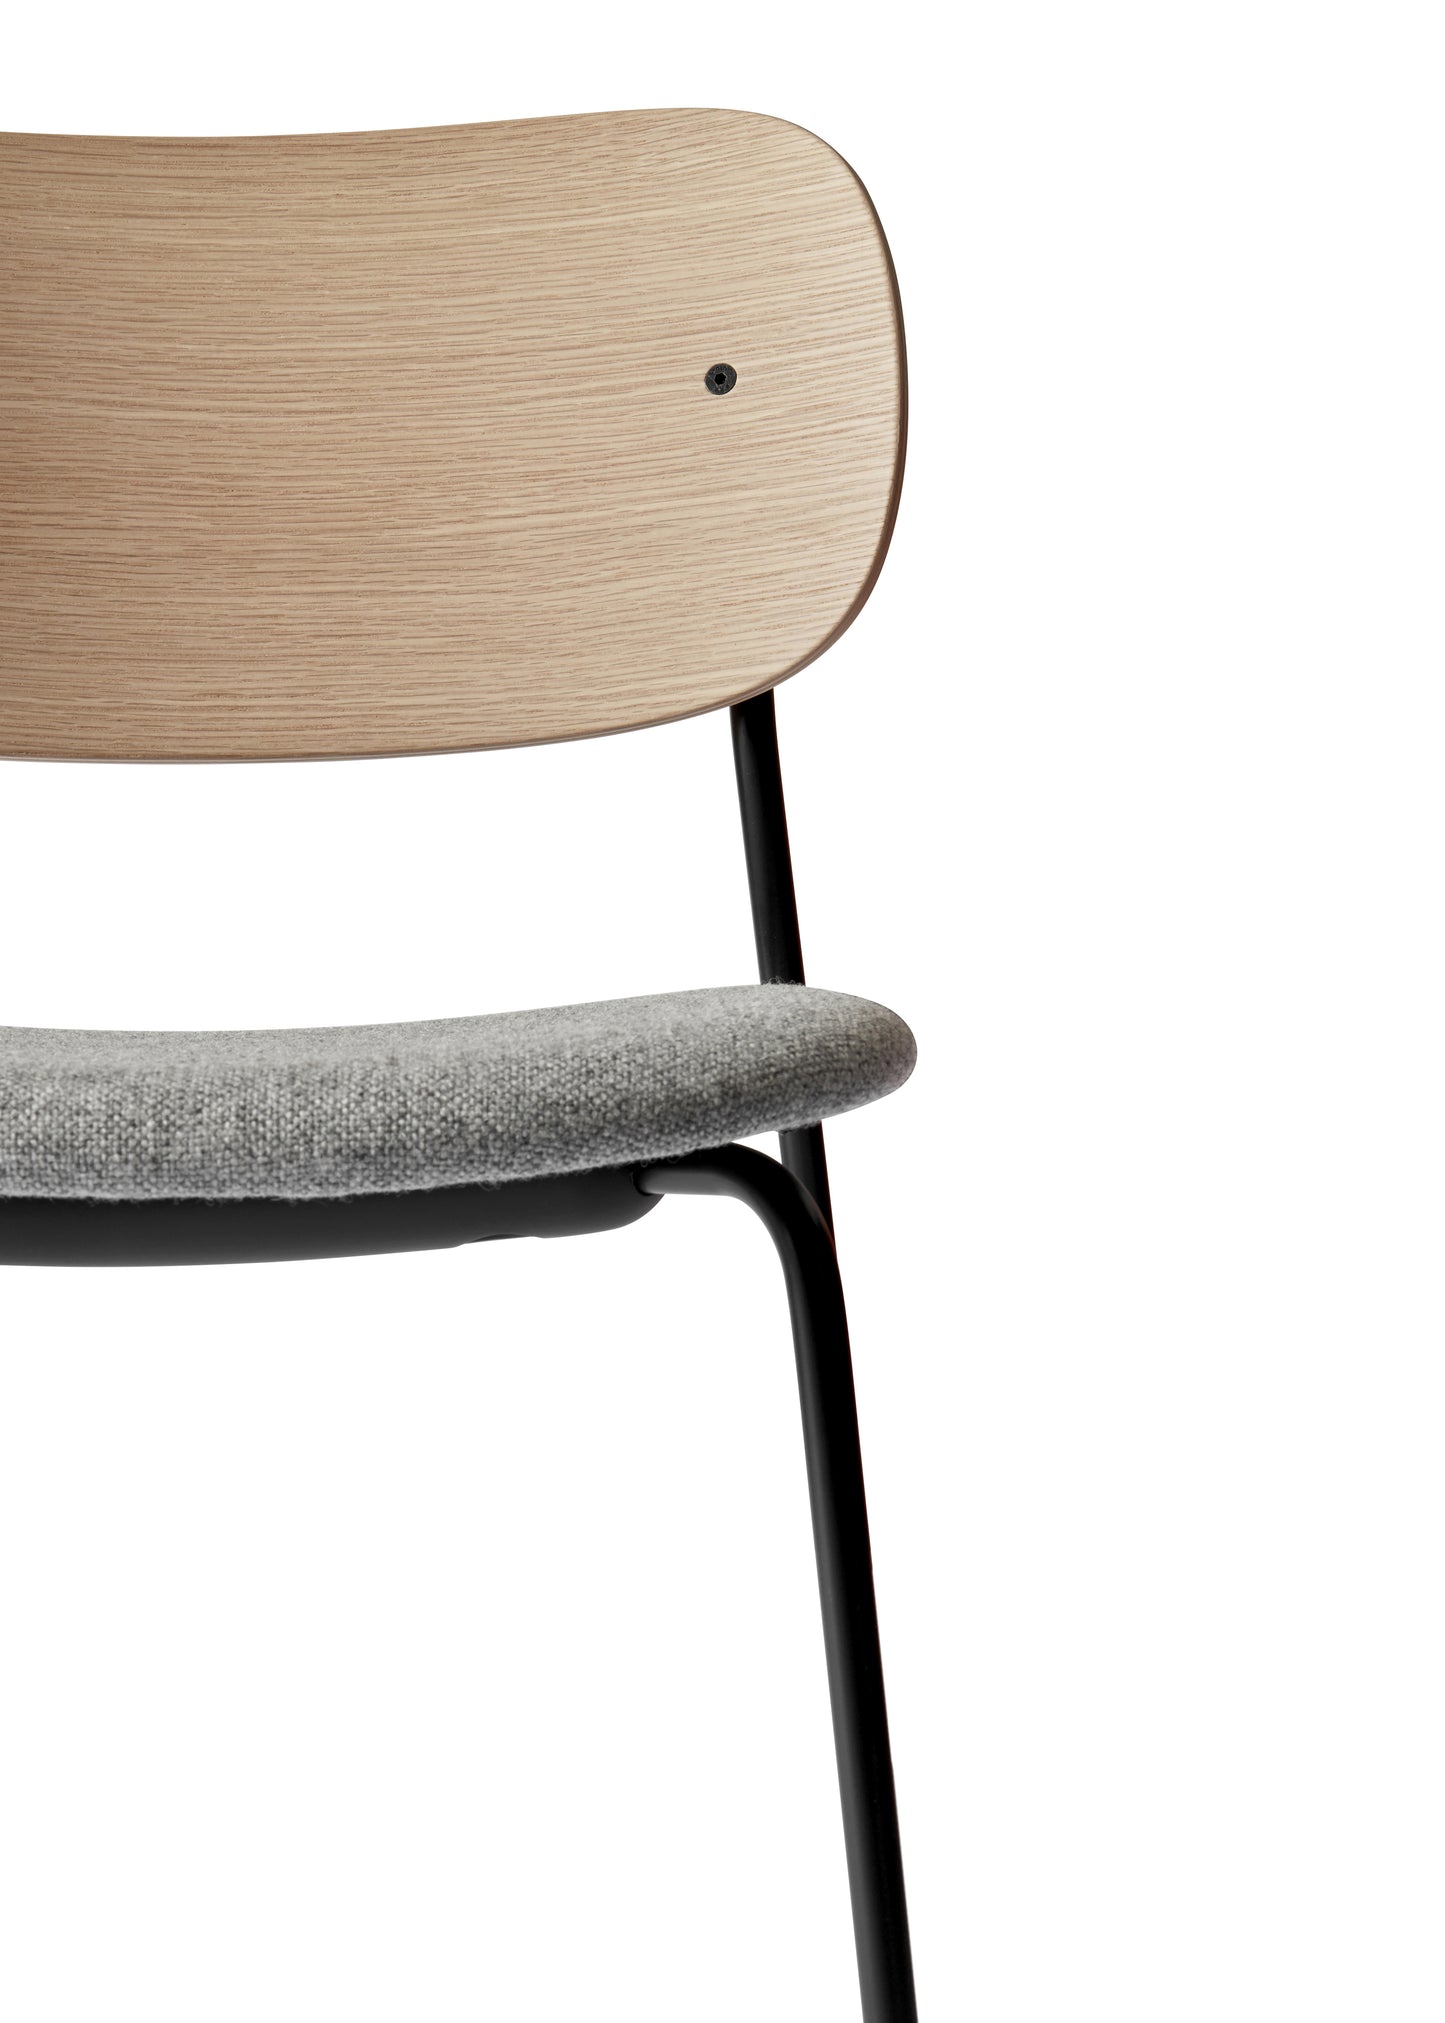 Co Chair - Upholstered Seat by Menu / Audo Copenhagen